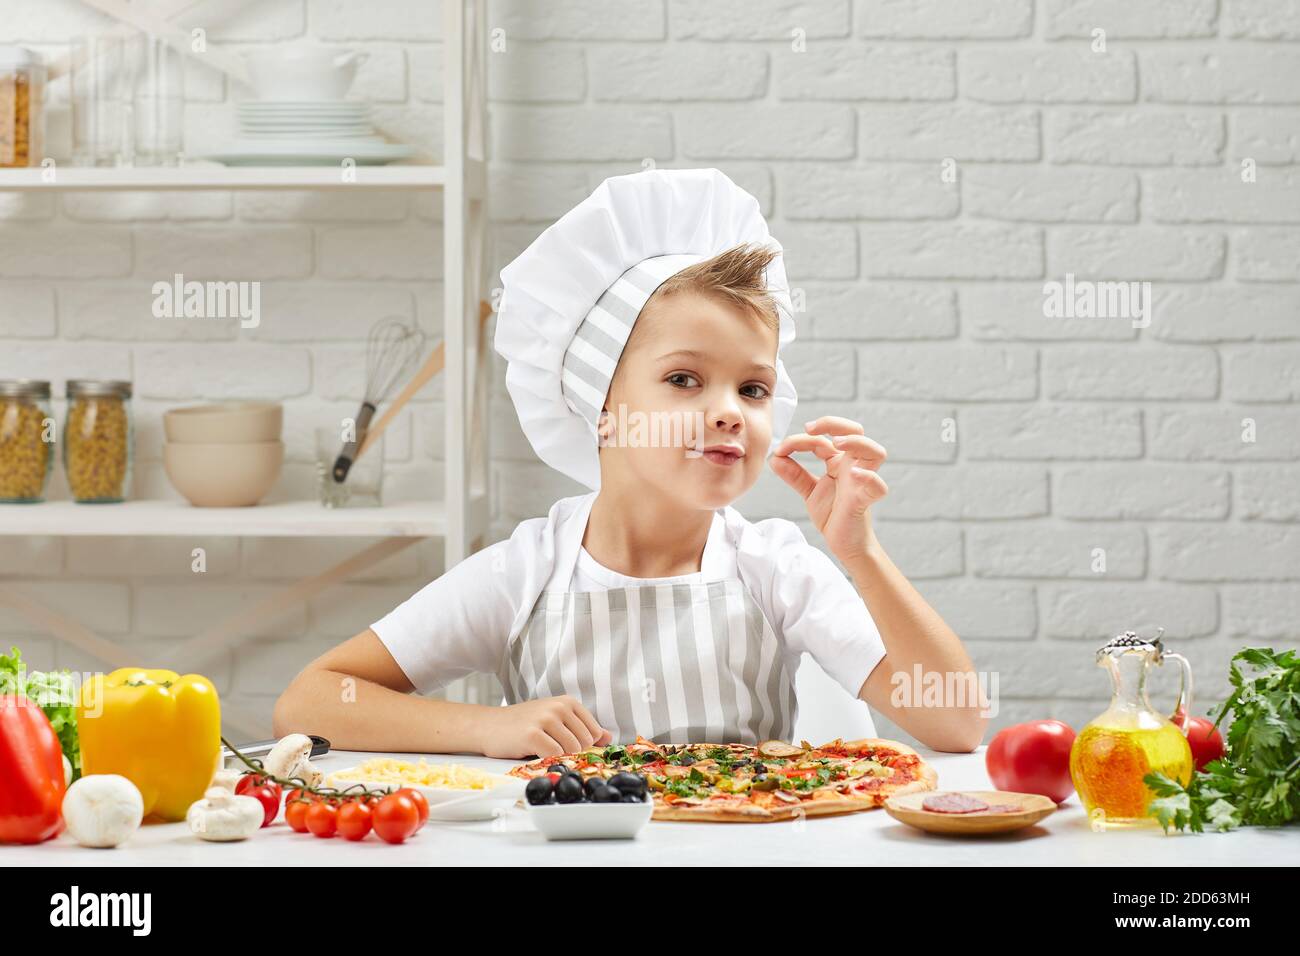 child making tasty delicious gesture by kissing fingers. little boy in chef hat and an apron cooking pizza in the kitchen. Stock Photo